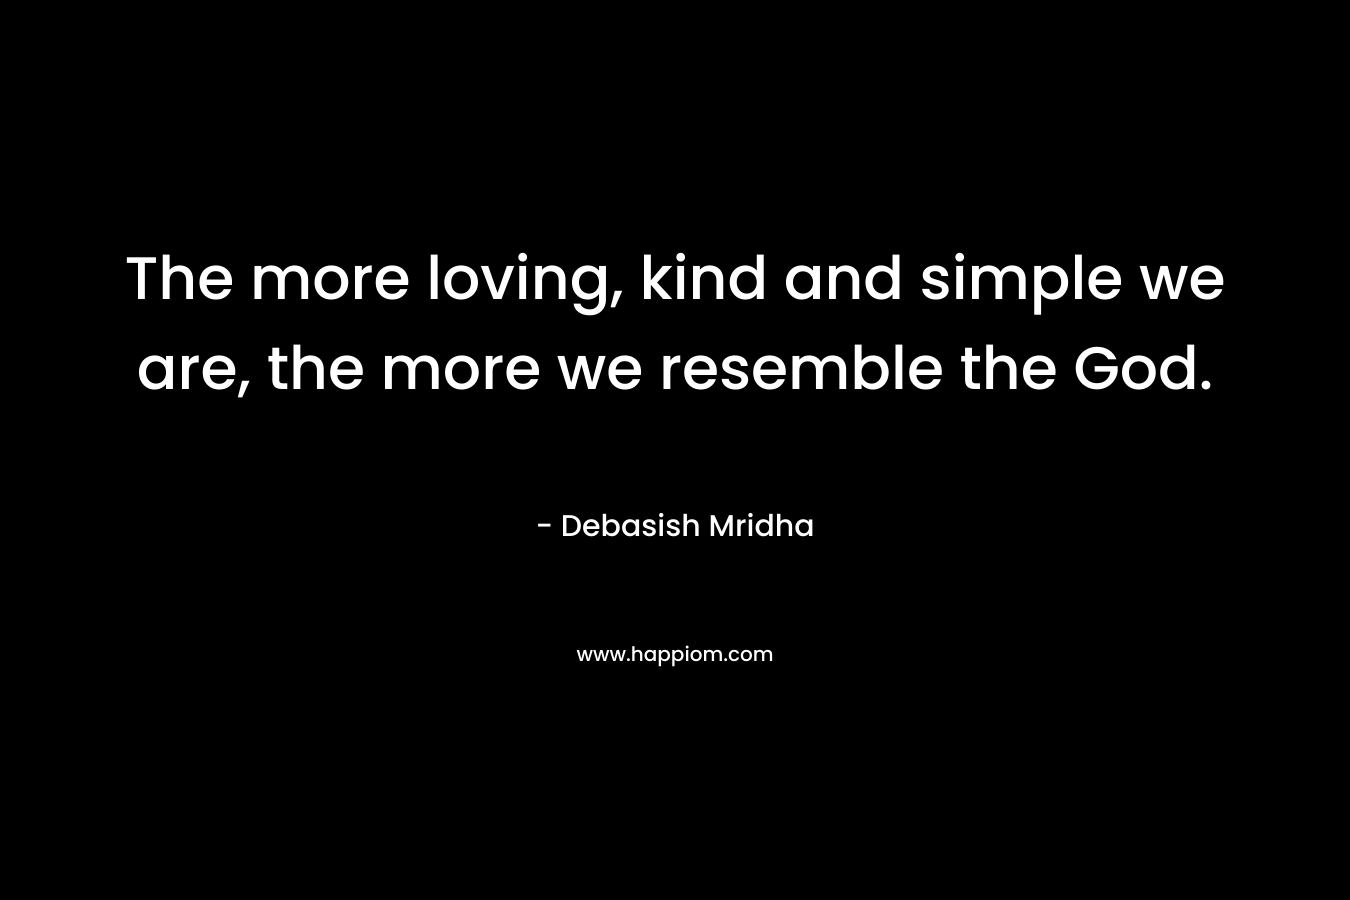 The more loving, kind and simple we are, the more we resemble the God.